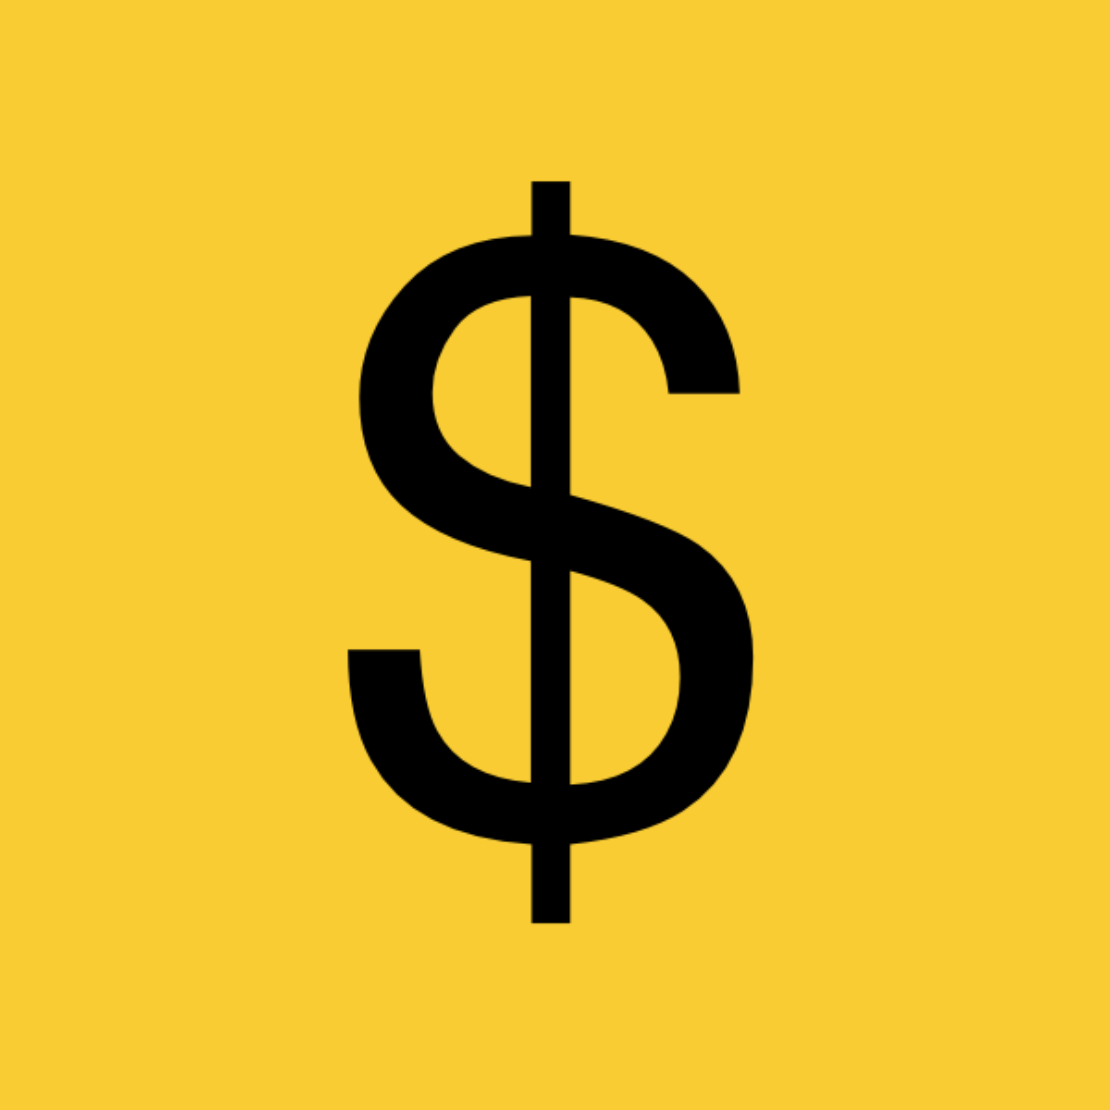 The Dollar currency symbol